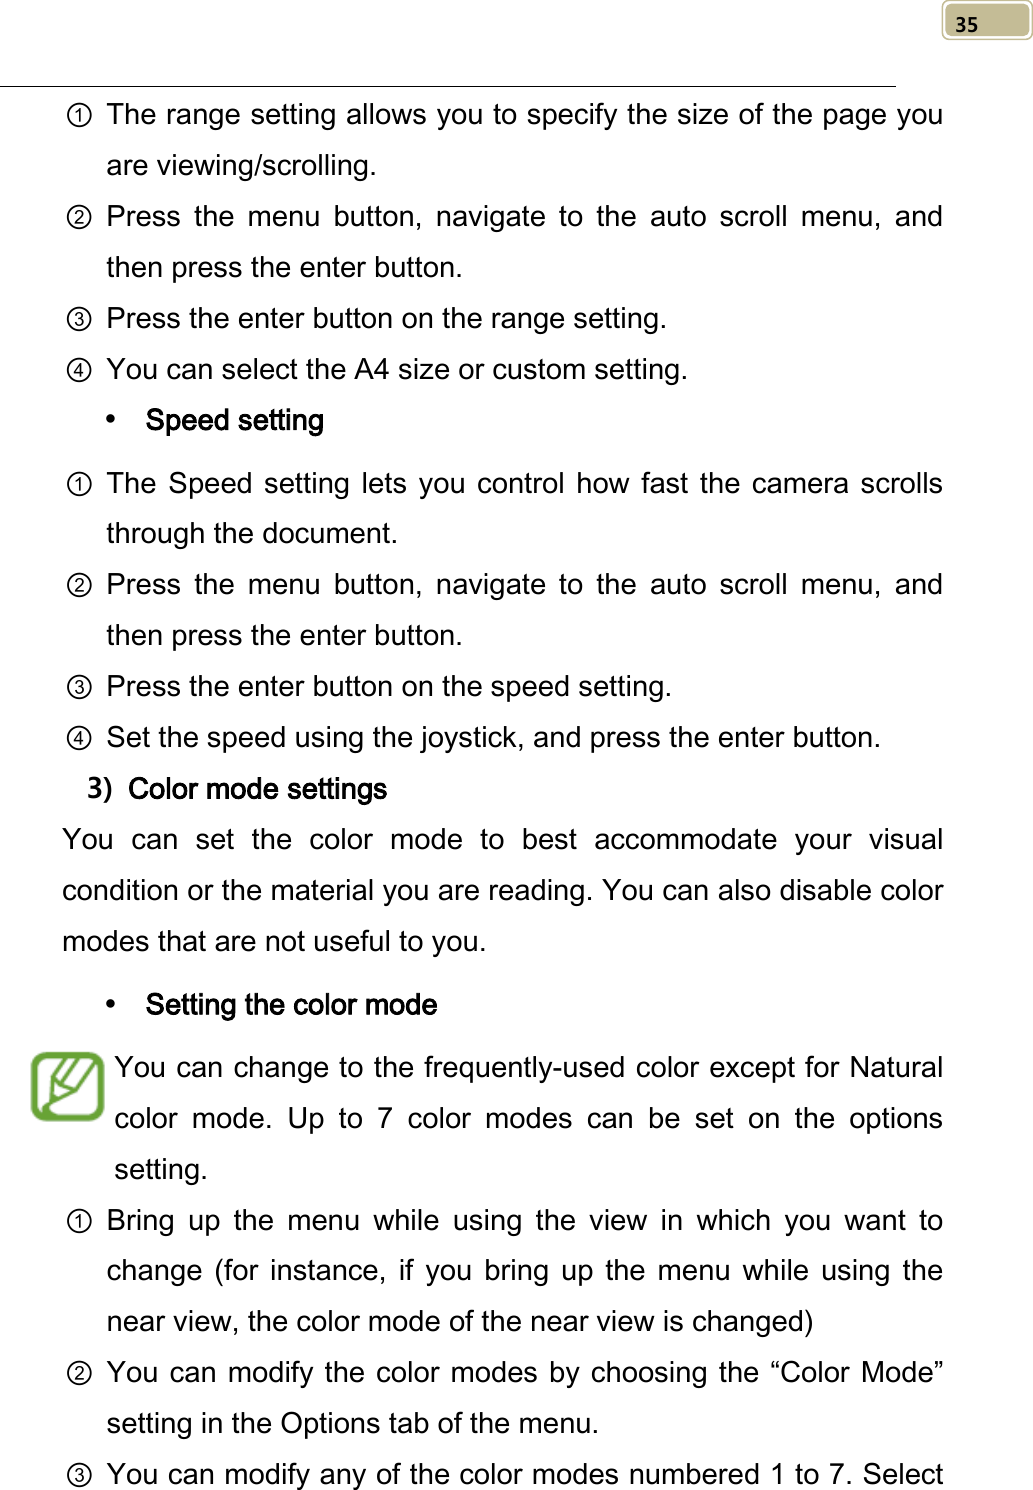   35 ① The range setting allows you to specify the size of the page you are viewing/scrolling. ② Press the menu button, navigate to the auto scroll menu, and then press the enter button. ③ Press the enter button on the range setting. ④ You can select the A4 size or custom setting.  Speed setting ① The Speed setting lets you control how fast the camera scrolls through the document. ② Press the menu button, navigate to the auto scroll menu, and then press the enter button. ③ Press the enter button on the speed setting. ④ Set the speed using the joystick, and press the enter button. 3) Color mode settings You can set the color mode to best accommodate your visual condition or the material you are reading. You can also disable color modes that are not useful to you.  Setting the color mode You can change to the frequently-used color except for Natural color mode.  Up to 7 color modes  can be set on the options setting. ① Bring  up the menu while using the view in which you want to change  (for instance,  if  you bring up the menu while using the near view, the color mode of the near view is changed) ② You can modify the color modes by choosing the “Color Mode” setting in the Options tab of the menu. ③ You can modify any of the color modes numbered 1 to 7. Select 